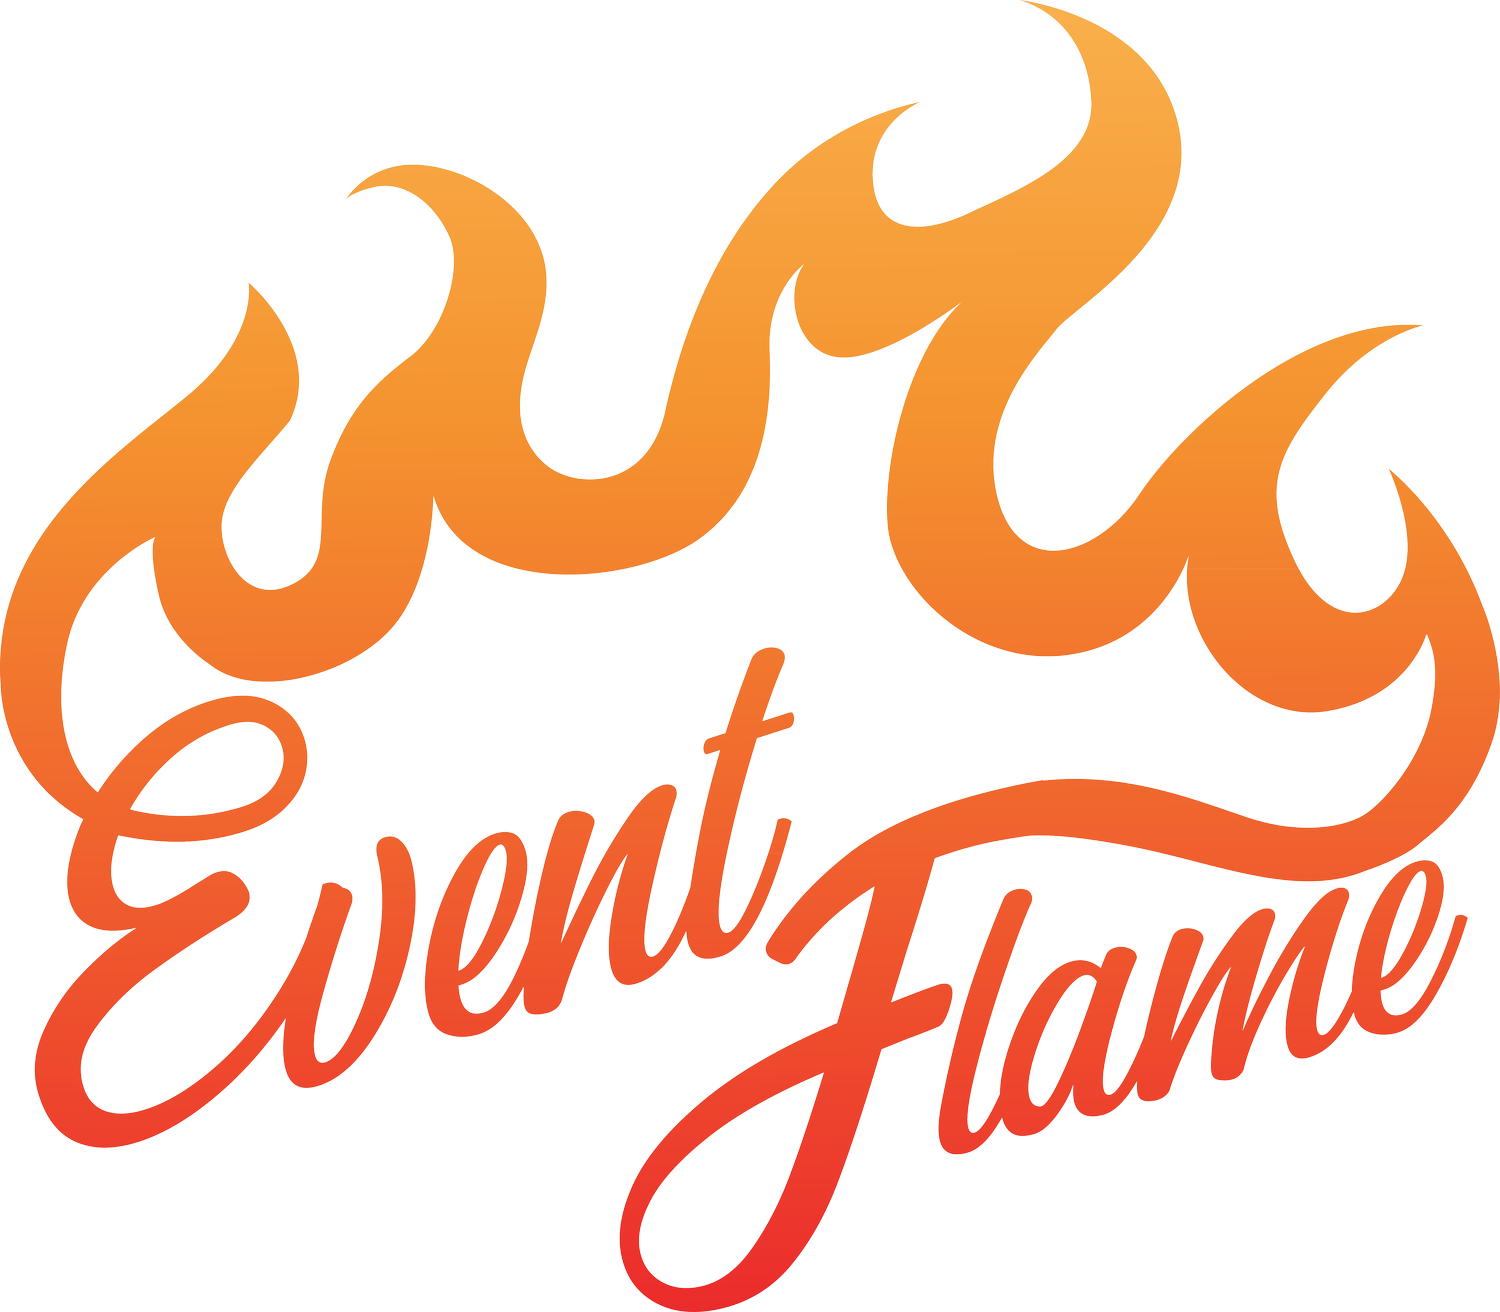 Event Flame